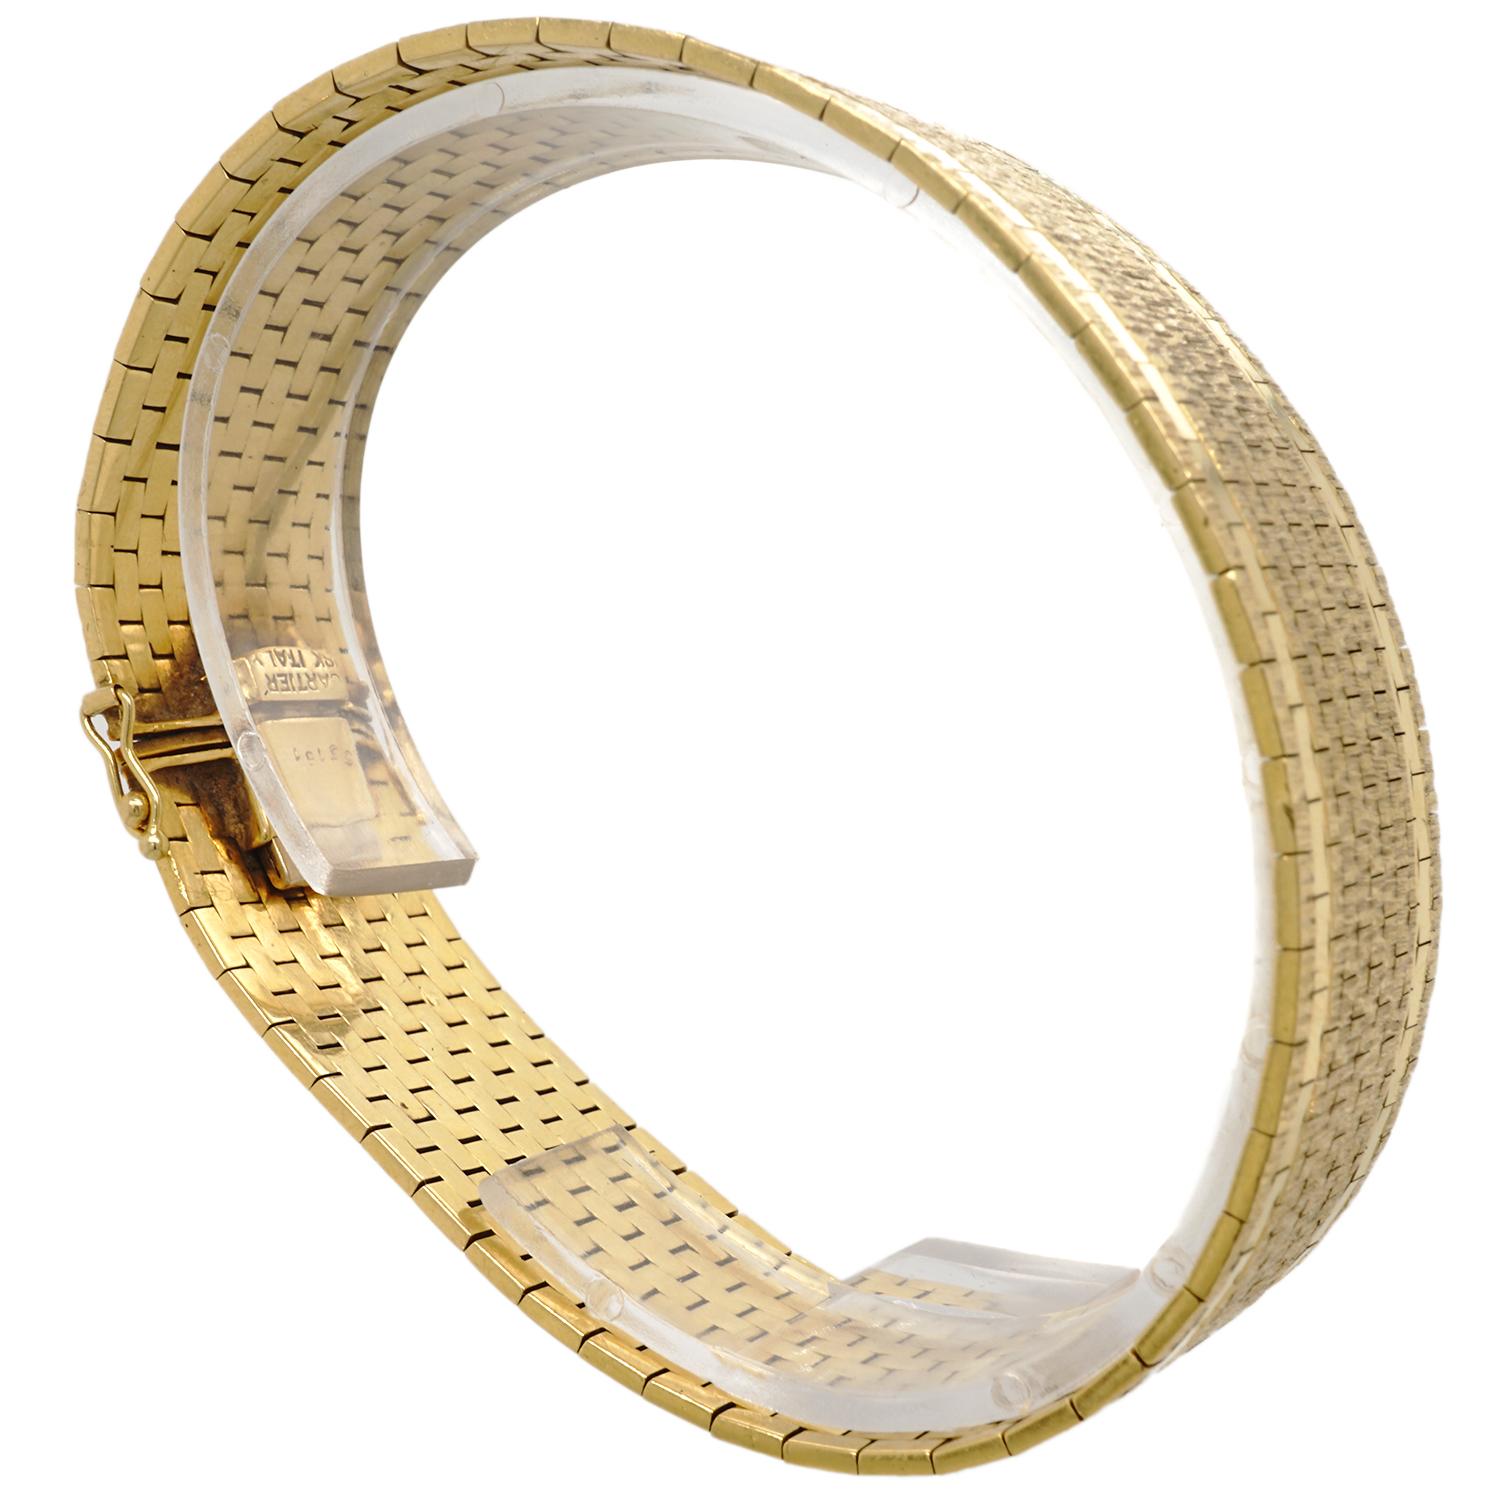 Cartier bracelet crafted in 18 karat yellow gold measuring L  7 3/4